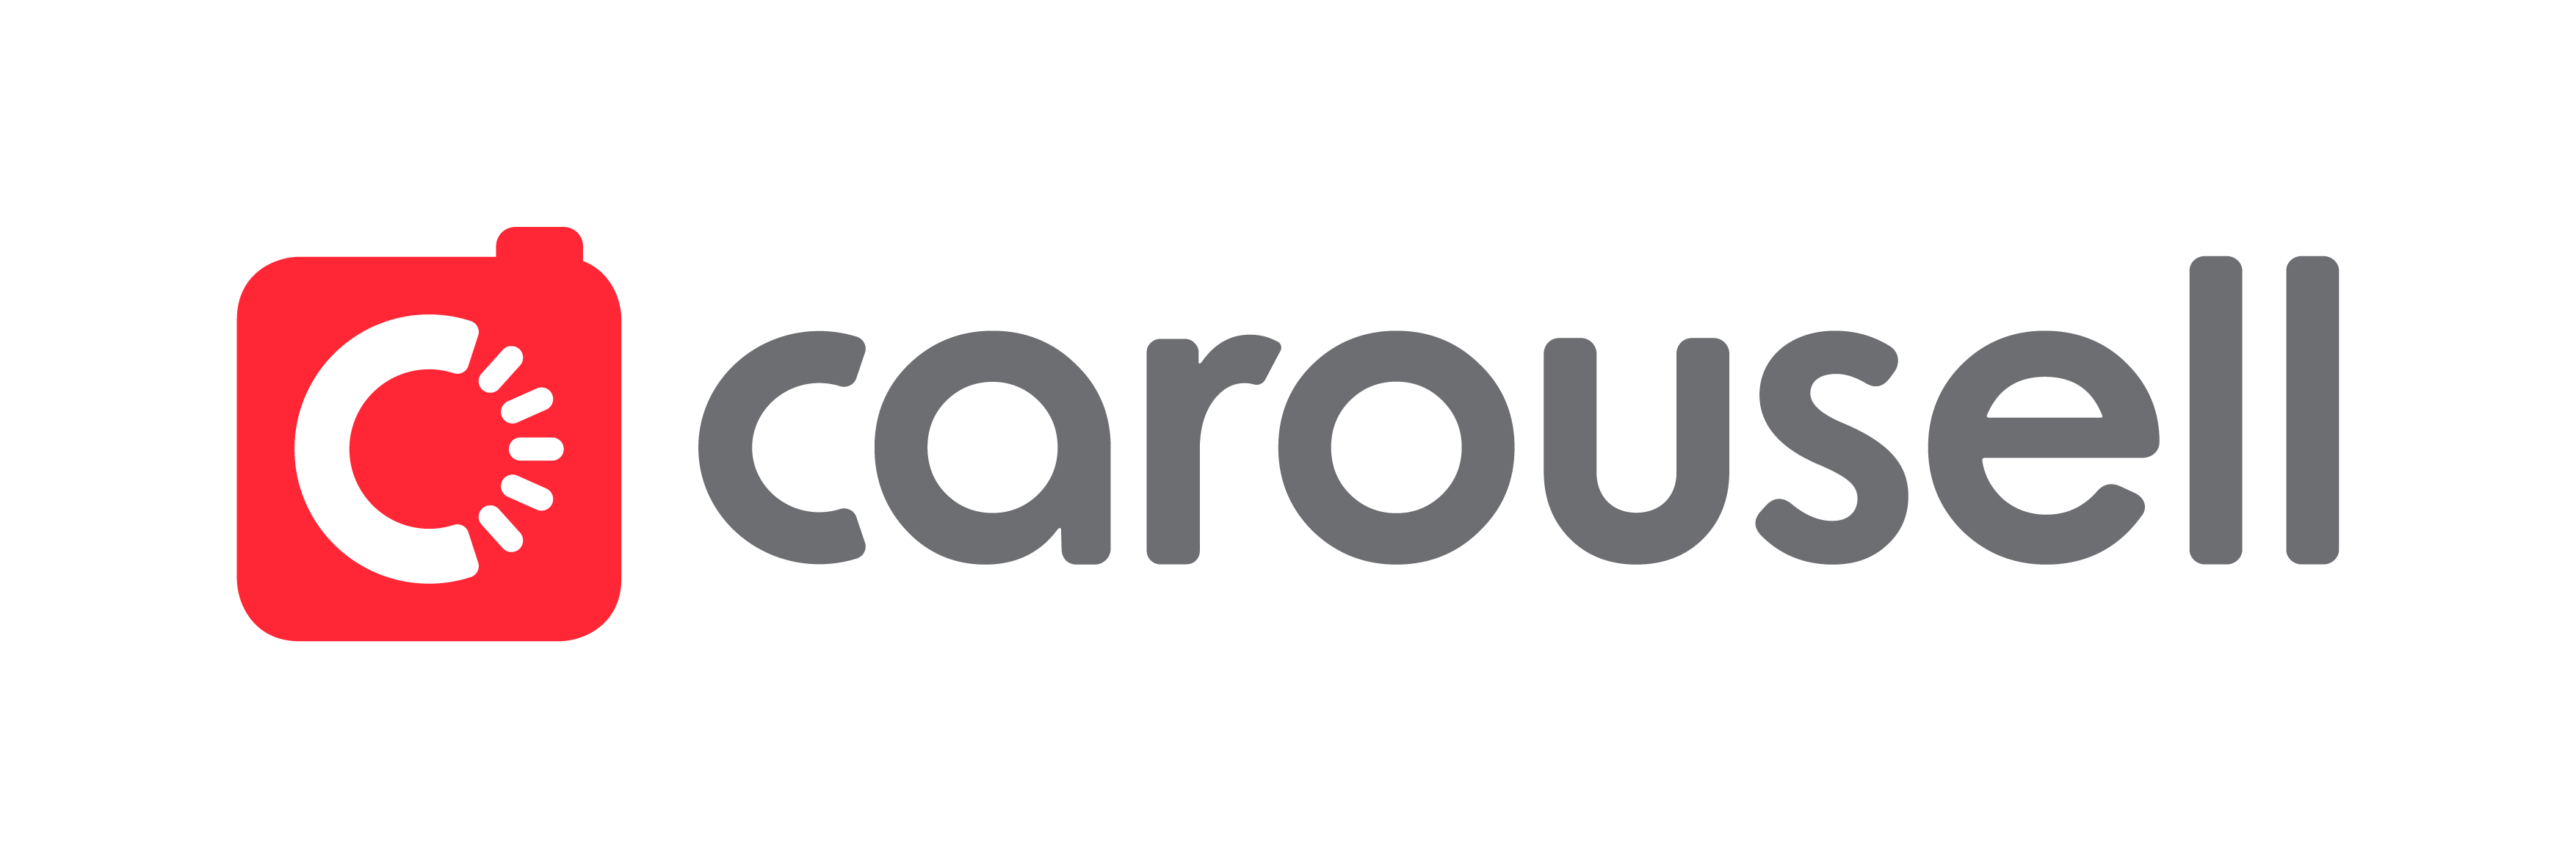 Carousell Group’s UX design job post on Arc’s remote job board.